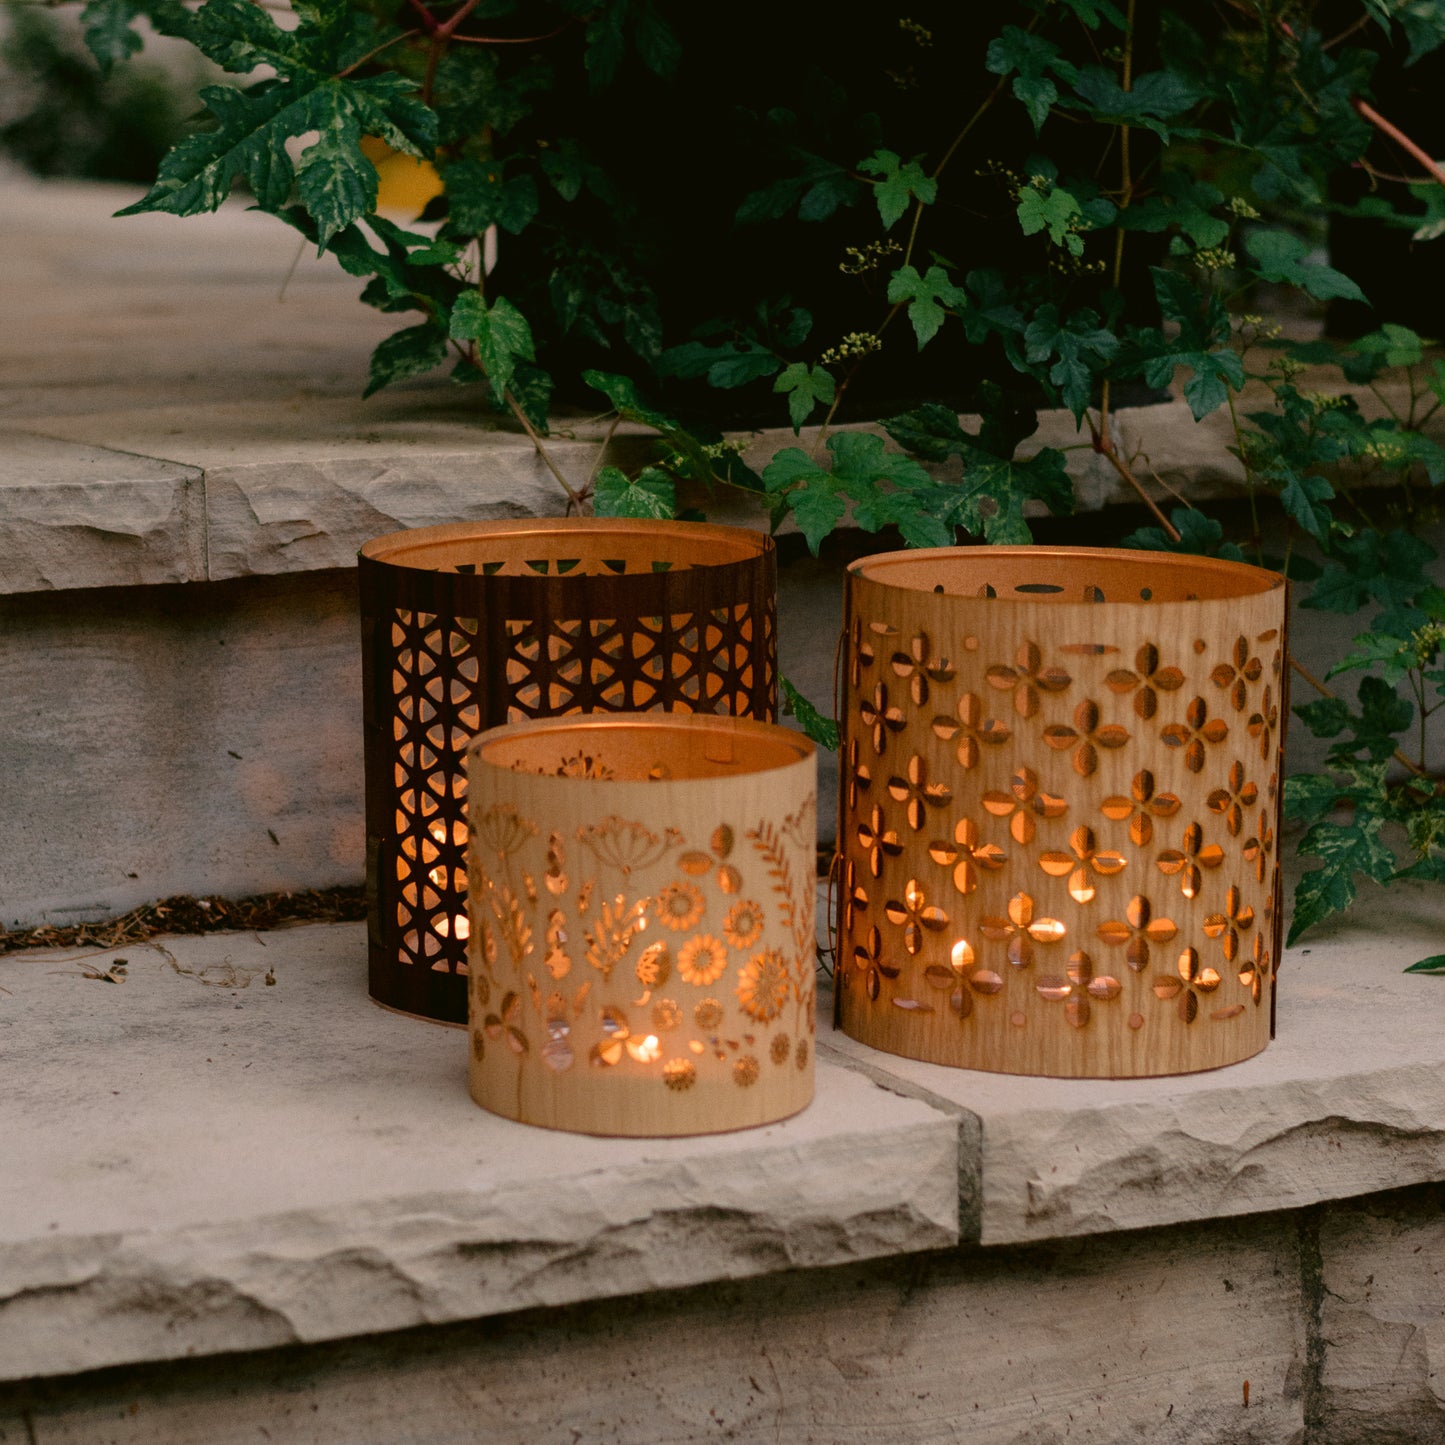 Extra cozy (No Glass) -Floral  detail -  Natural wood cover - For those who already have one of my lanterns (lanterncozies)